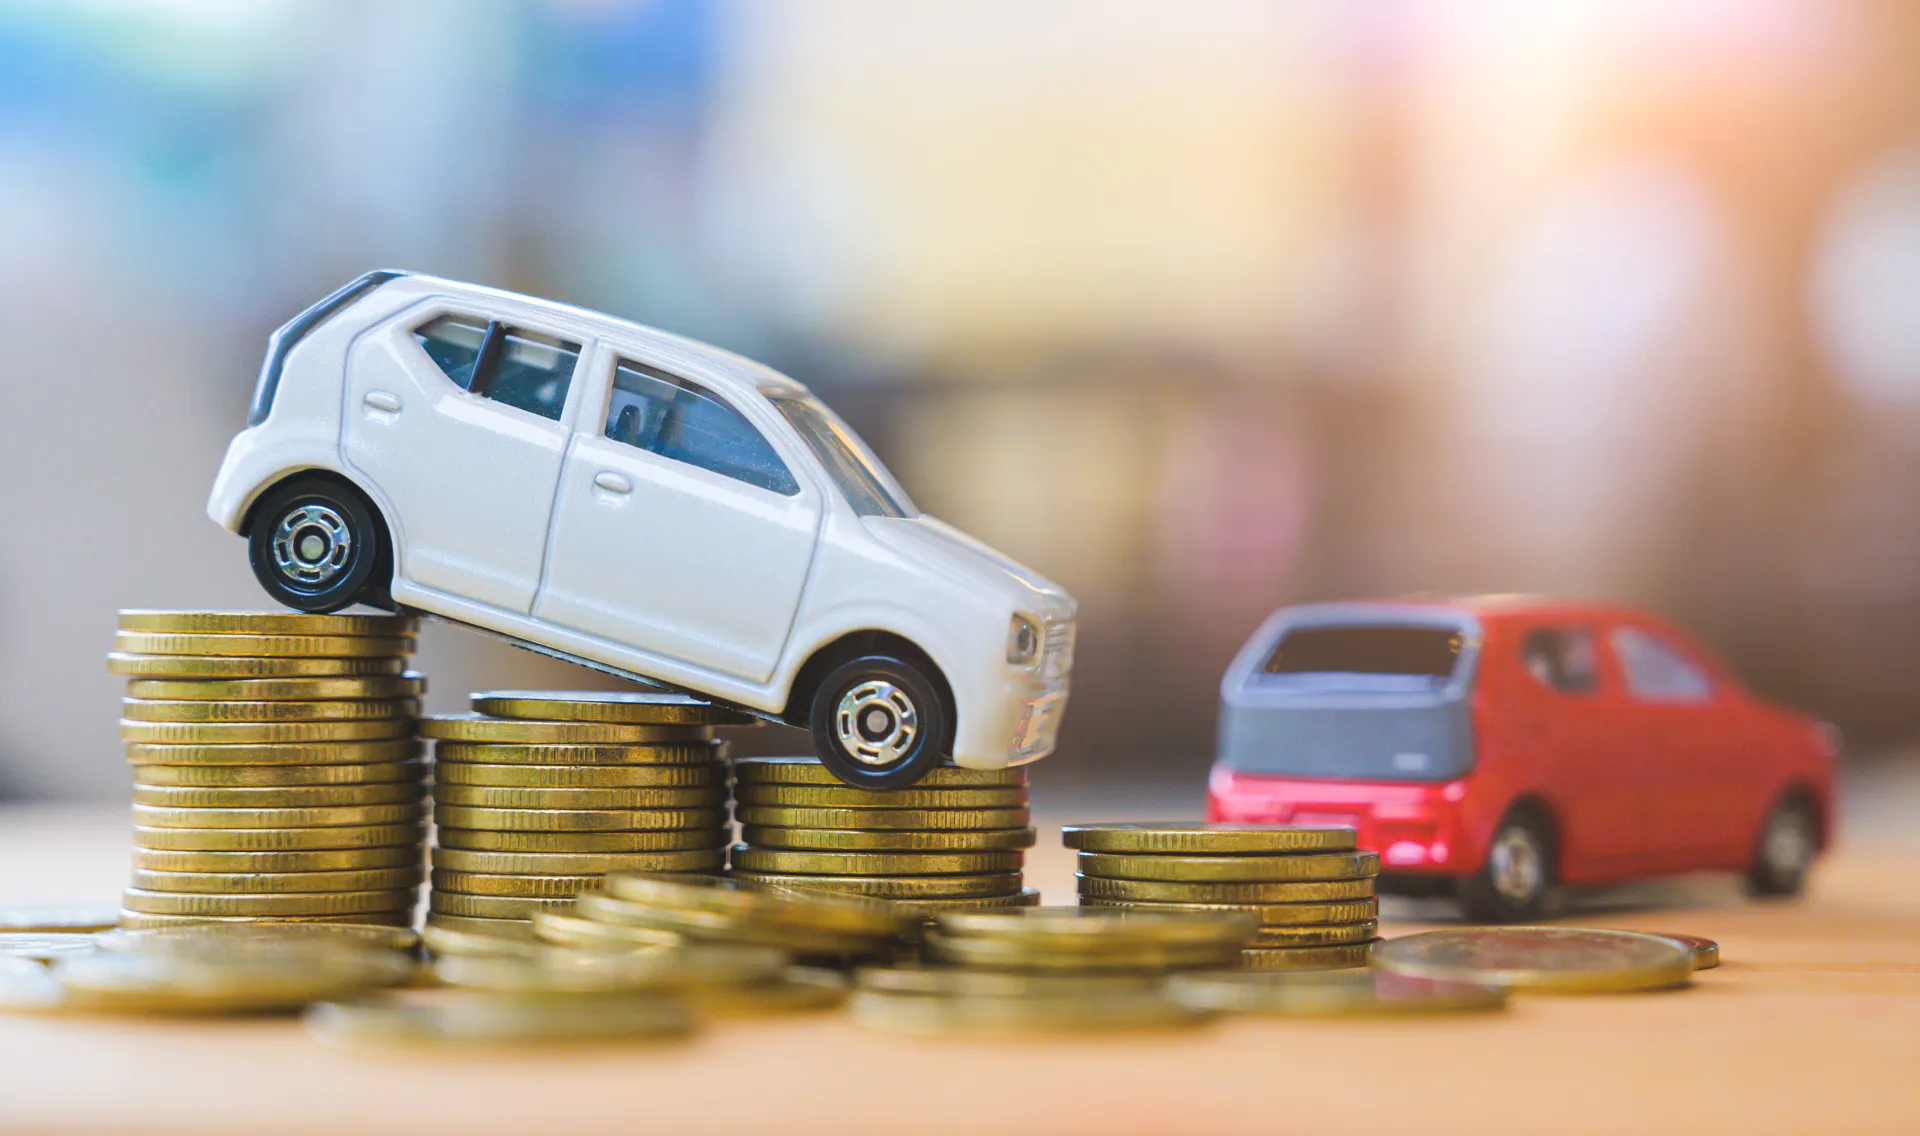 Car and stack of coin. Saving money for car concept. Car finance, buy car new concept.